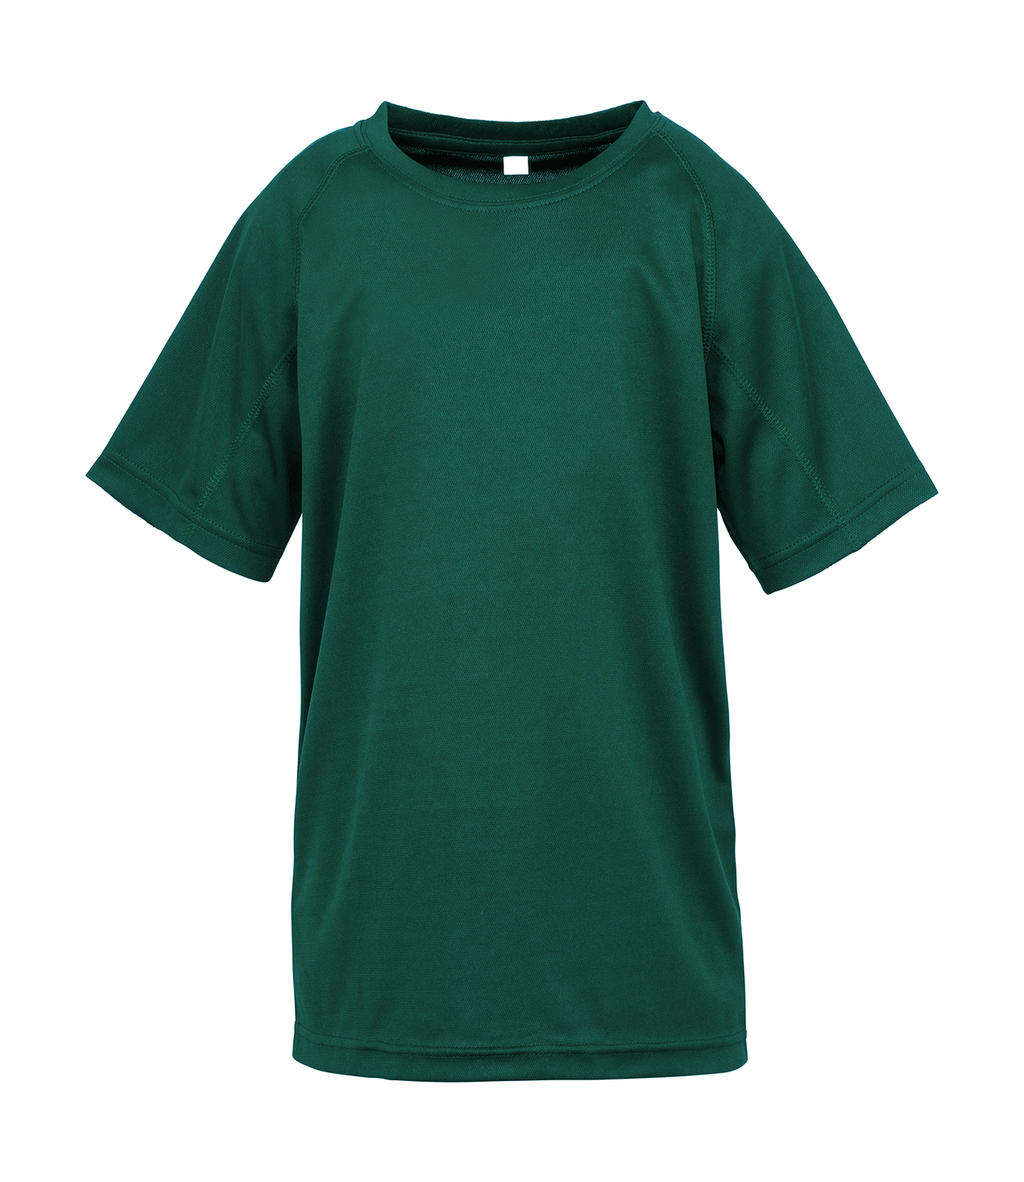  Junior Performance Aircool Tee in Farbe Bottle Green